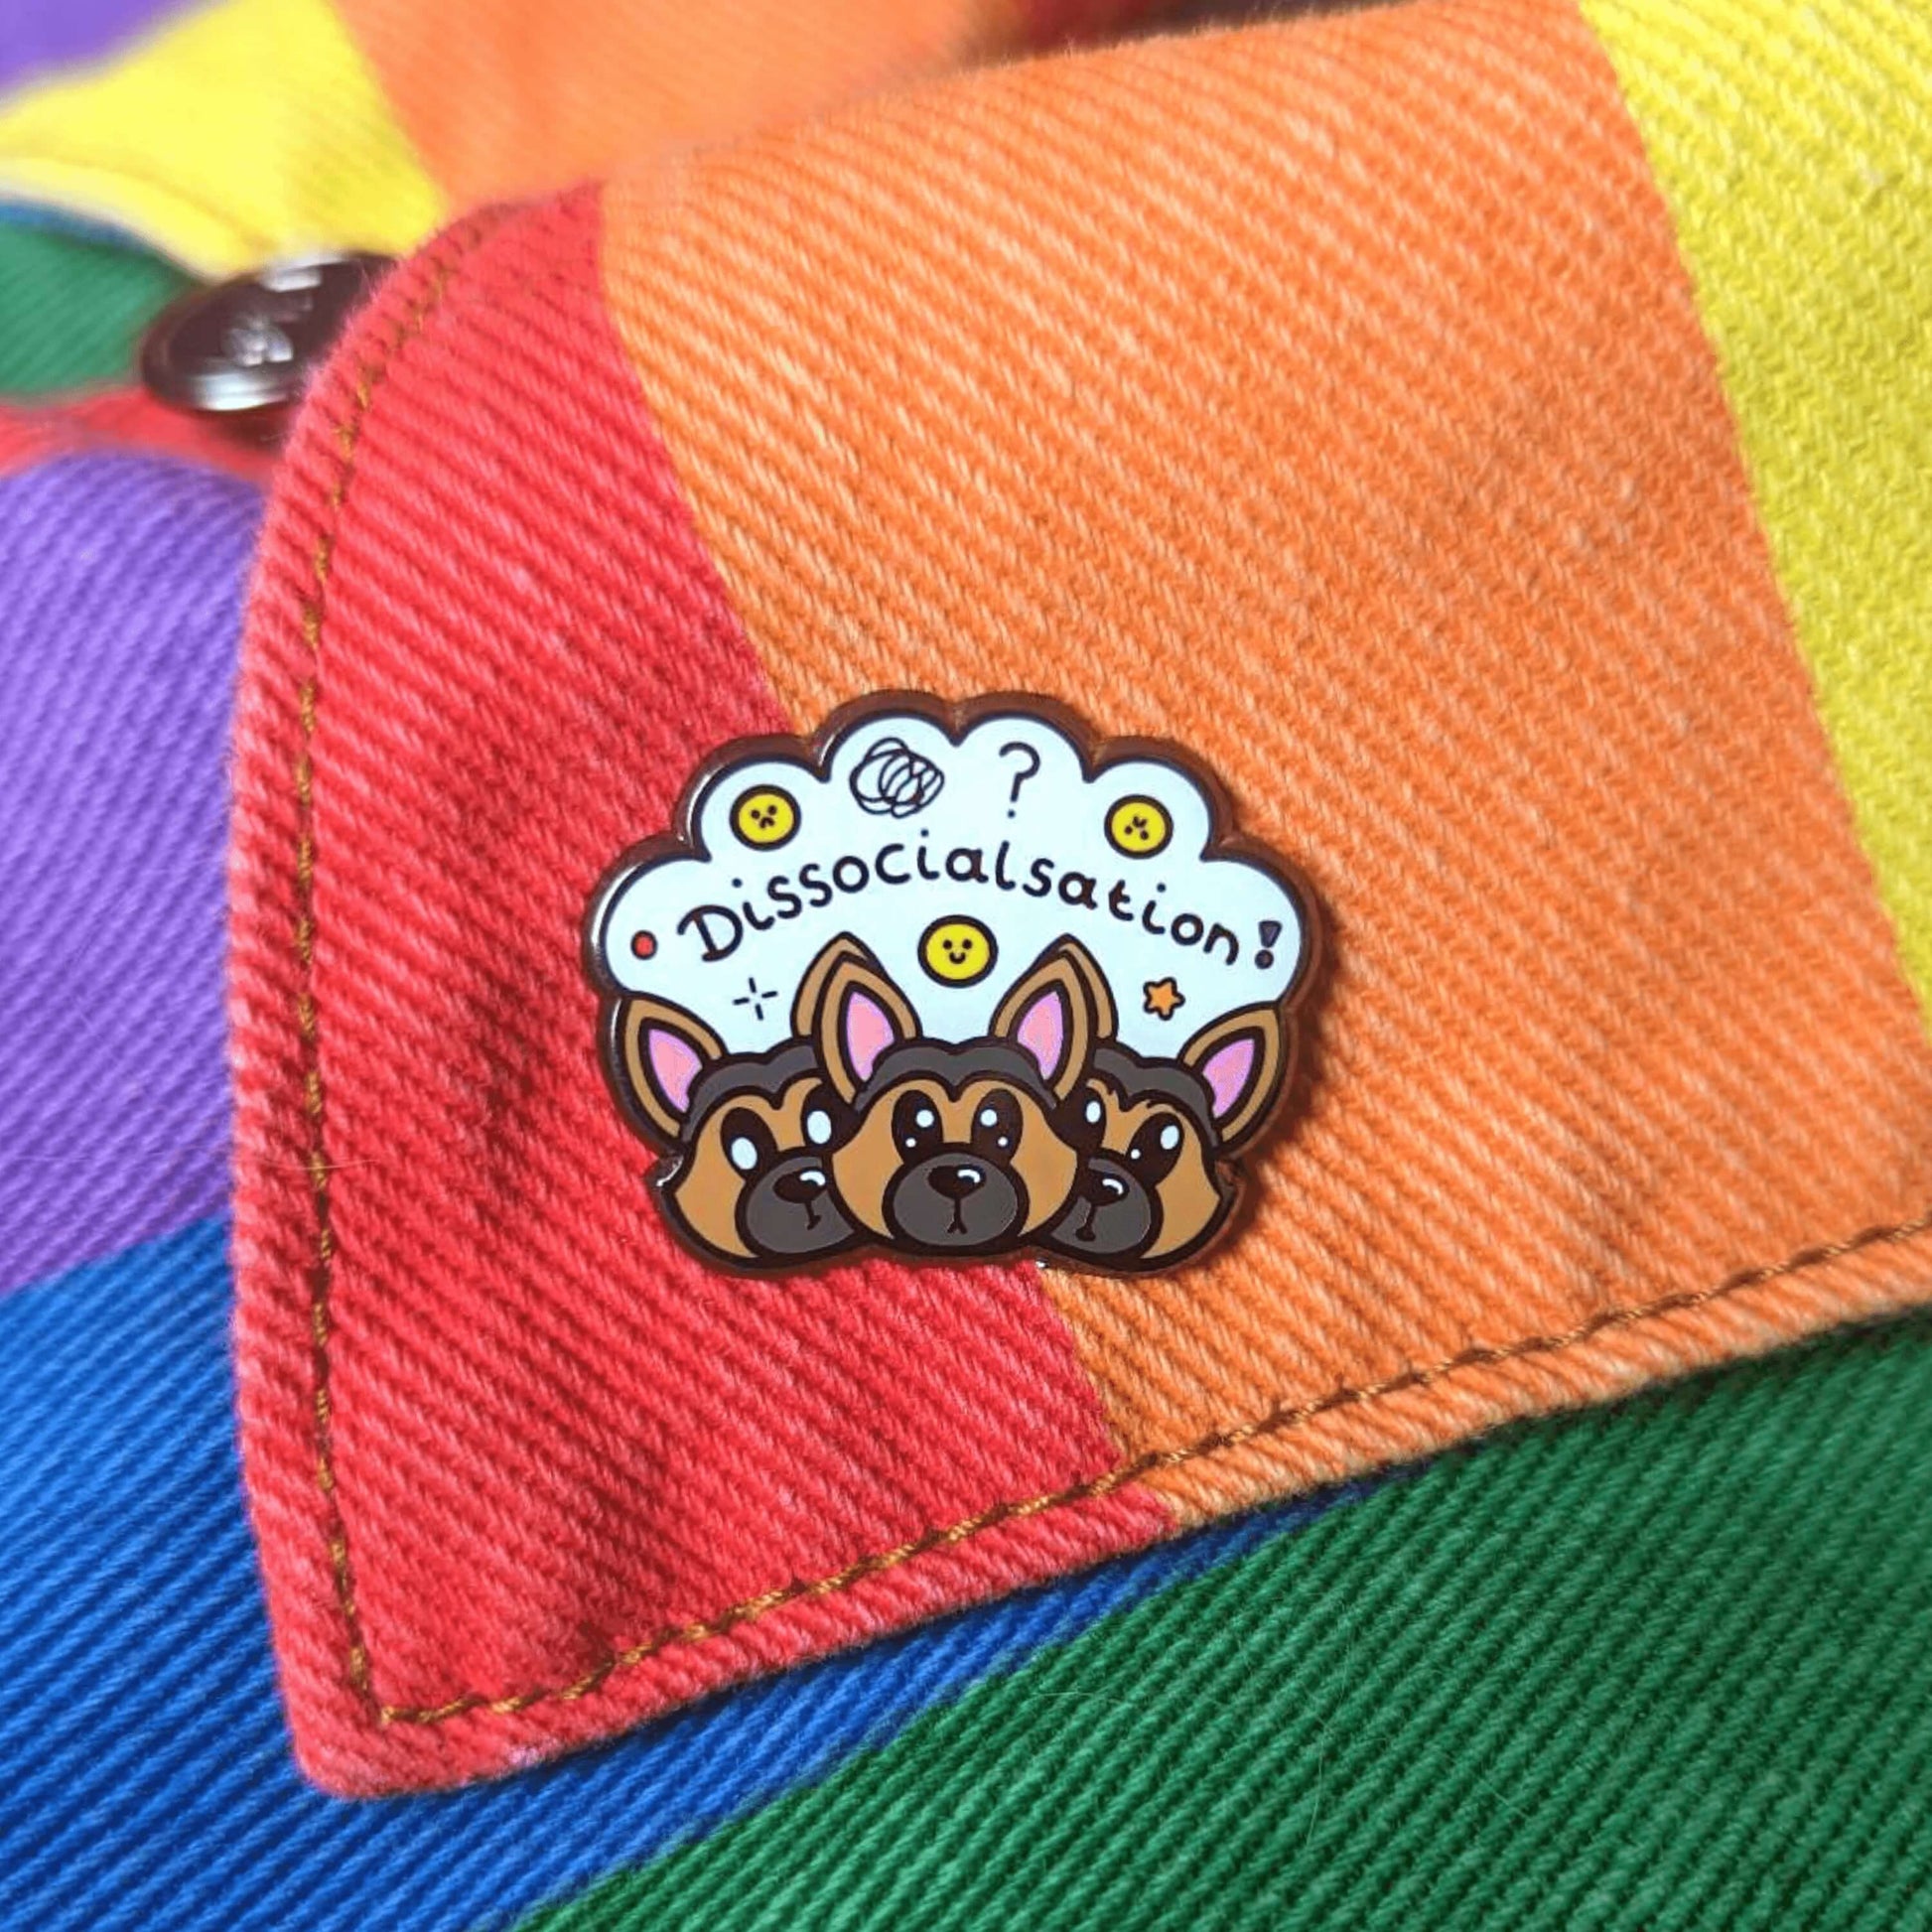 The Dissocialsation Enamel Pin - Dissociation on a rainbow denim jacket collar. Three confused brown and black Alsatian dog heads with their ears perked up, above them is a white cloud with sad and happy yellow faces, sparkles, question marks and black text reading 'dissocialsation!'. The design is raising awareness for dissociation.